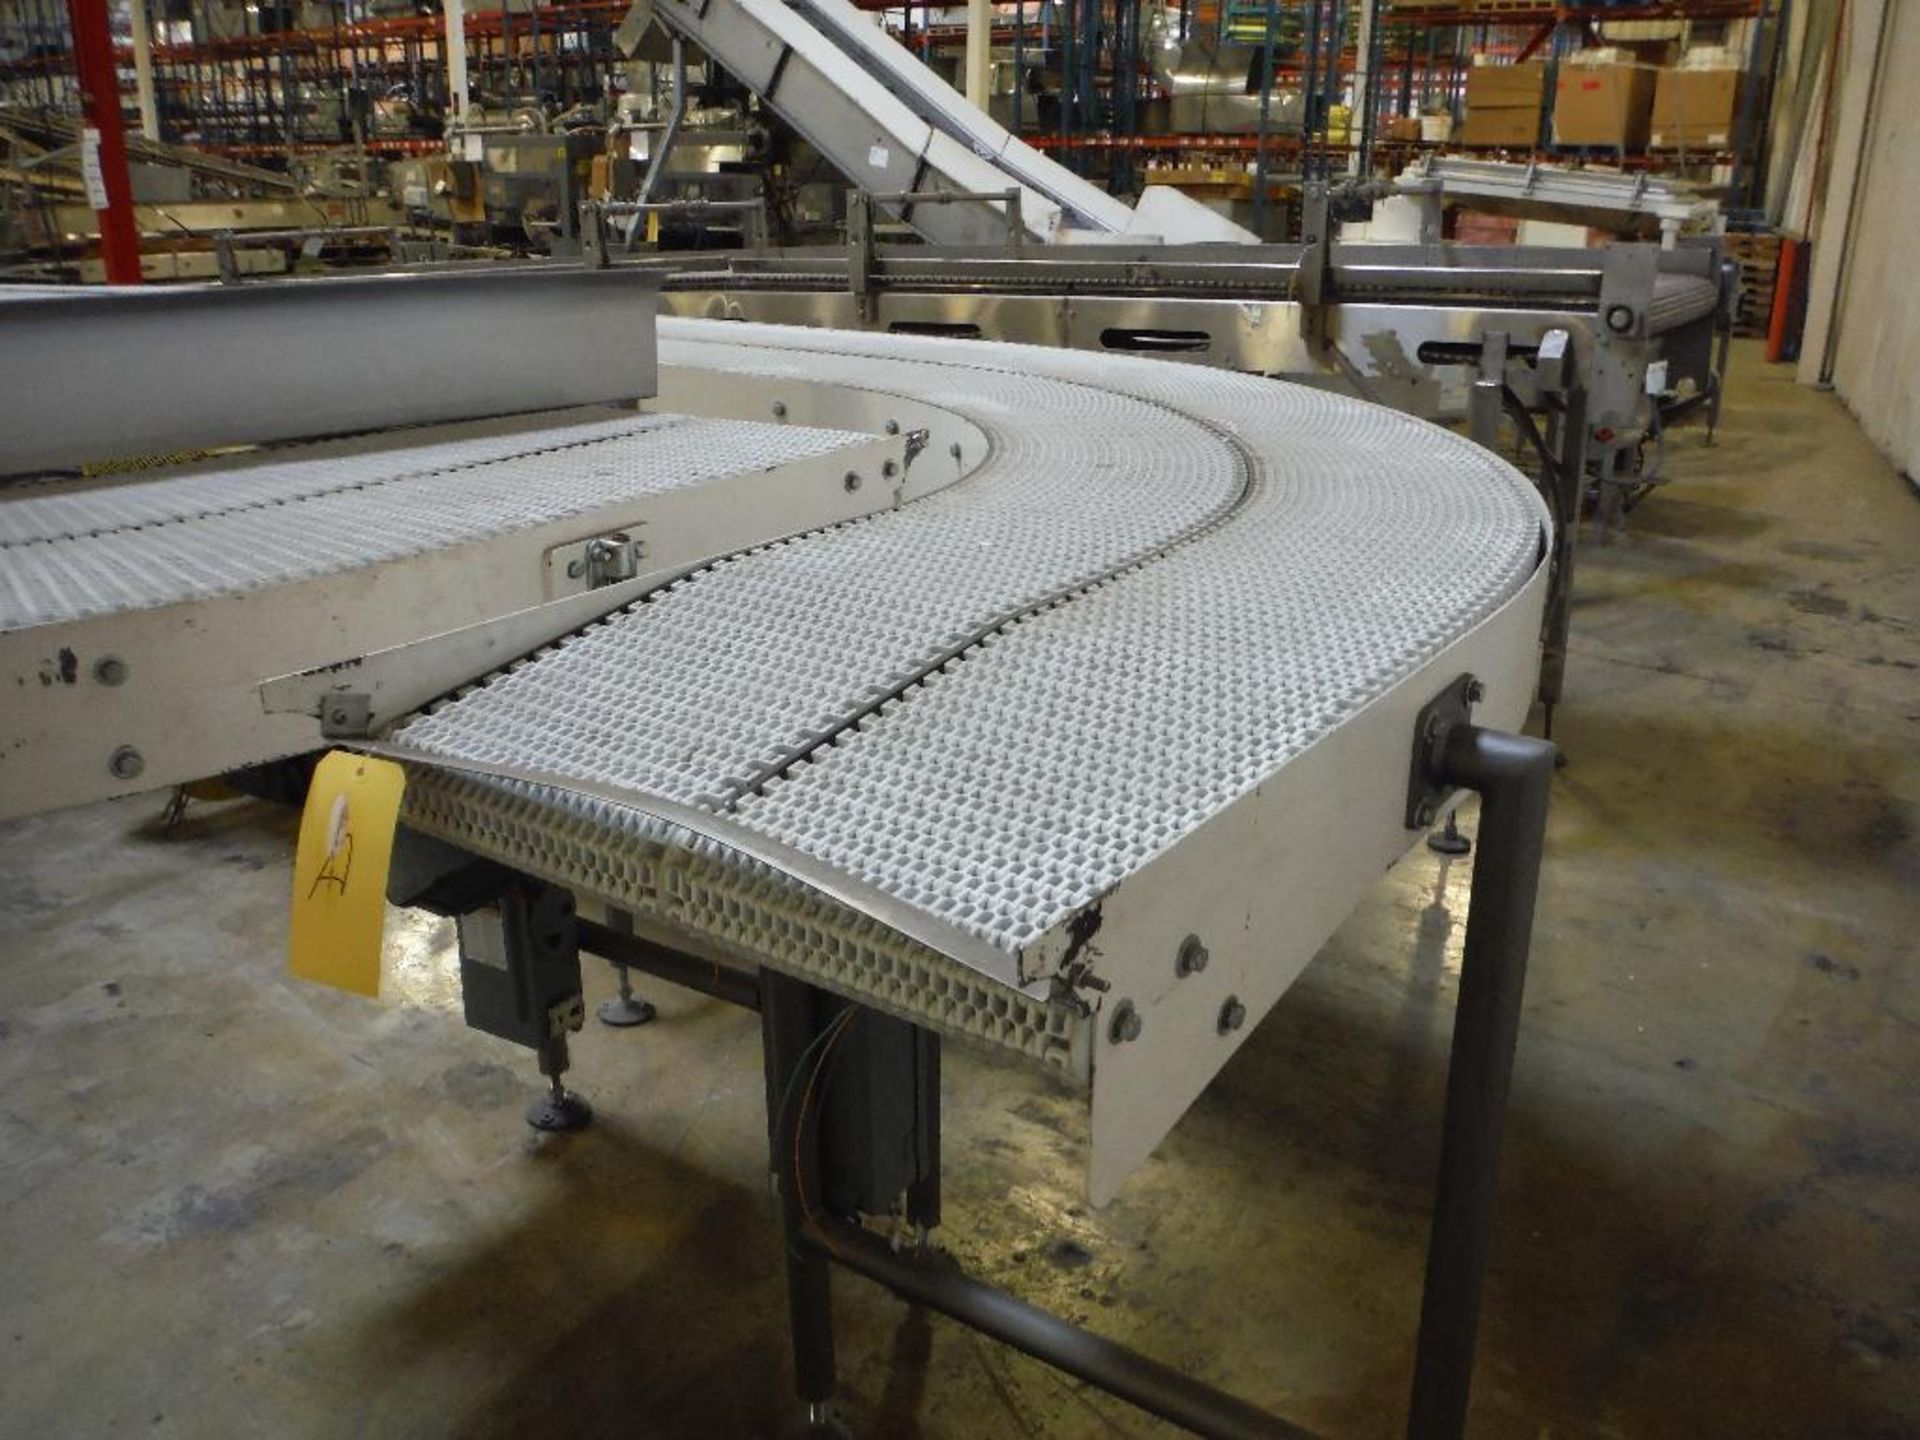 180 degree dual lane conveyor, 11.5 in. wide each, overall 192 in. long x 46 in. tall, carbon steel - Bild 5 aus 6